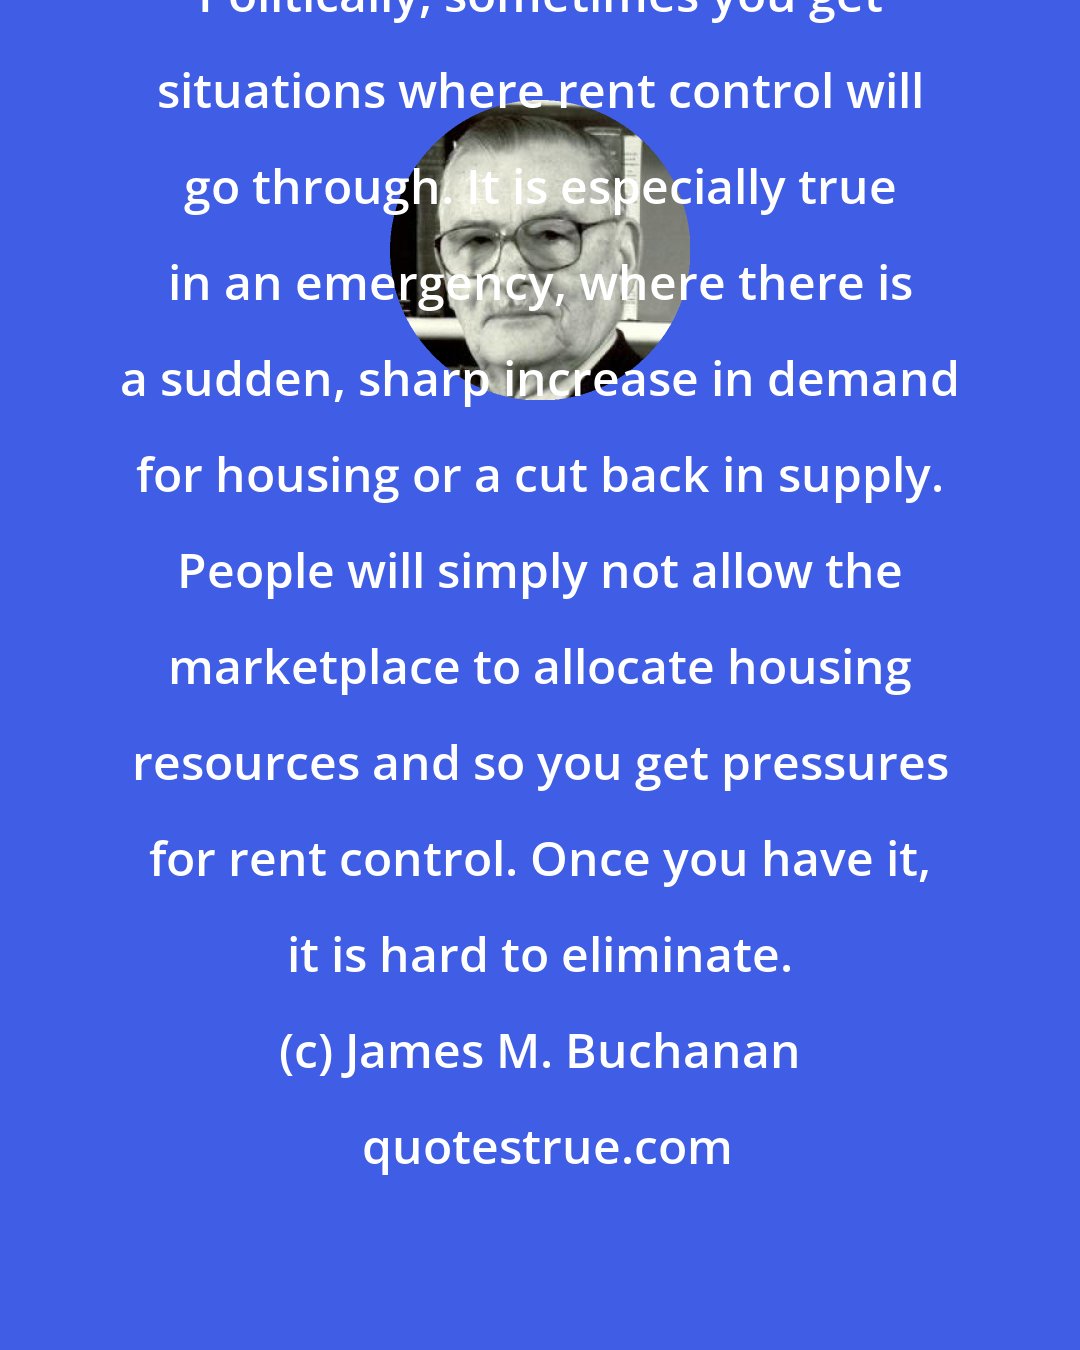 James M. Buchanan: Politically, sometimes you get situations where rent control will go through. It is especially true in an emergency, where there is a sudden, sharp increase in demand for housing or a cut back in supply. People will simply not allow the marketplace to allocate housing resources and so you get pressures for rent control. Once you have it, it is hard to eliminate.